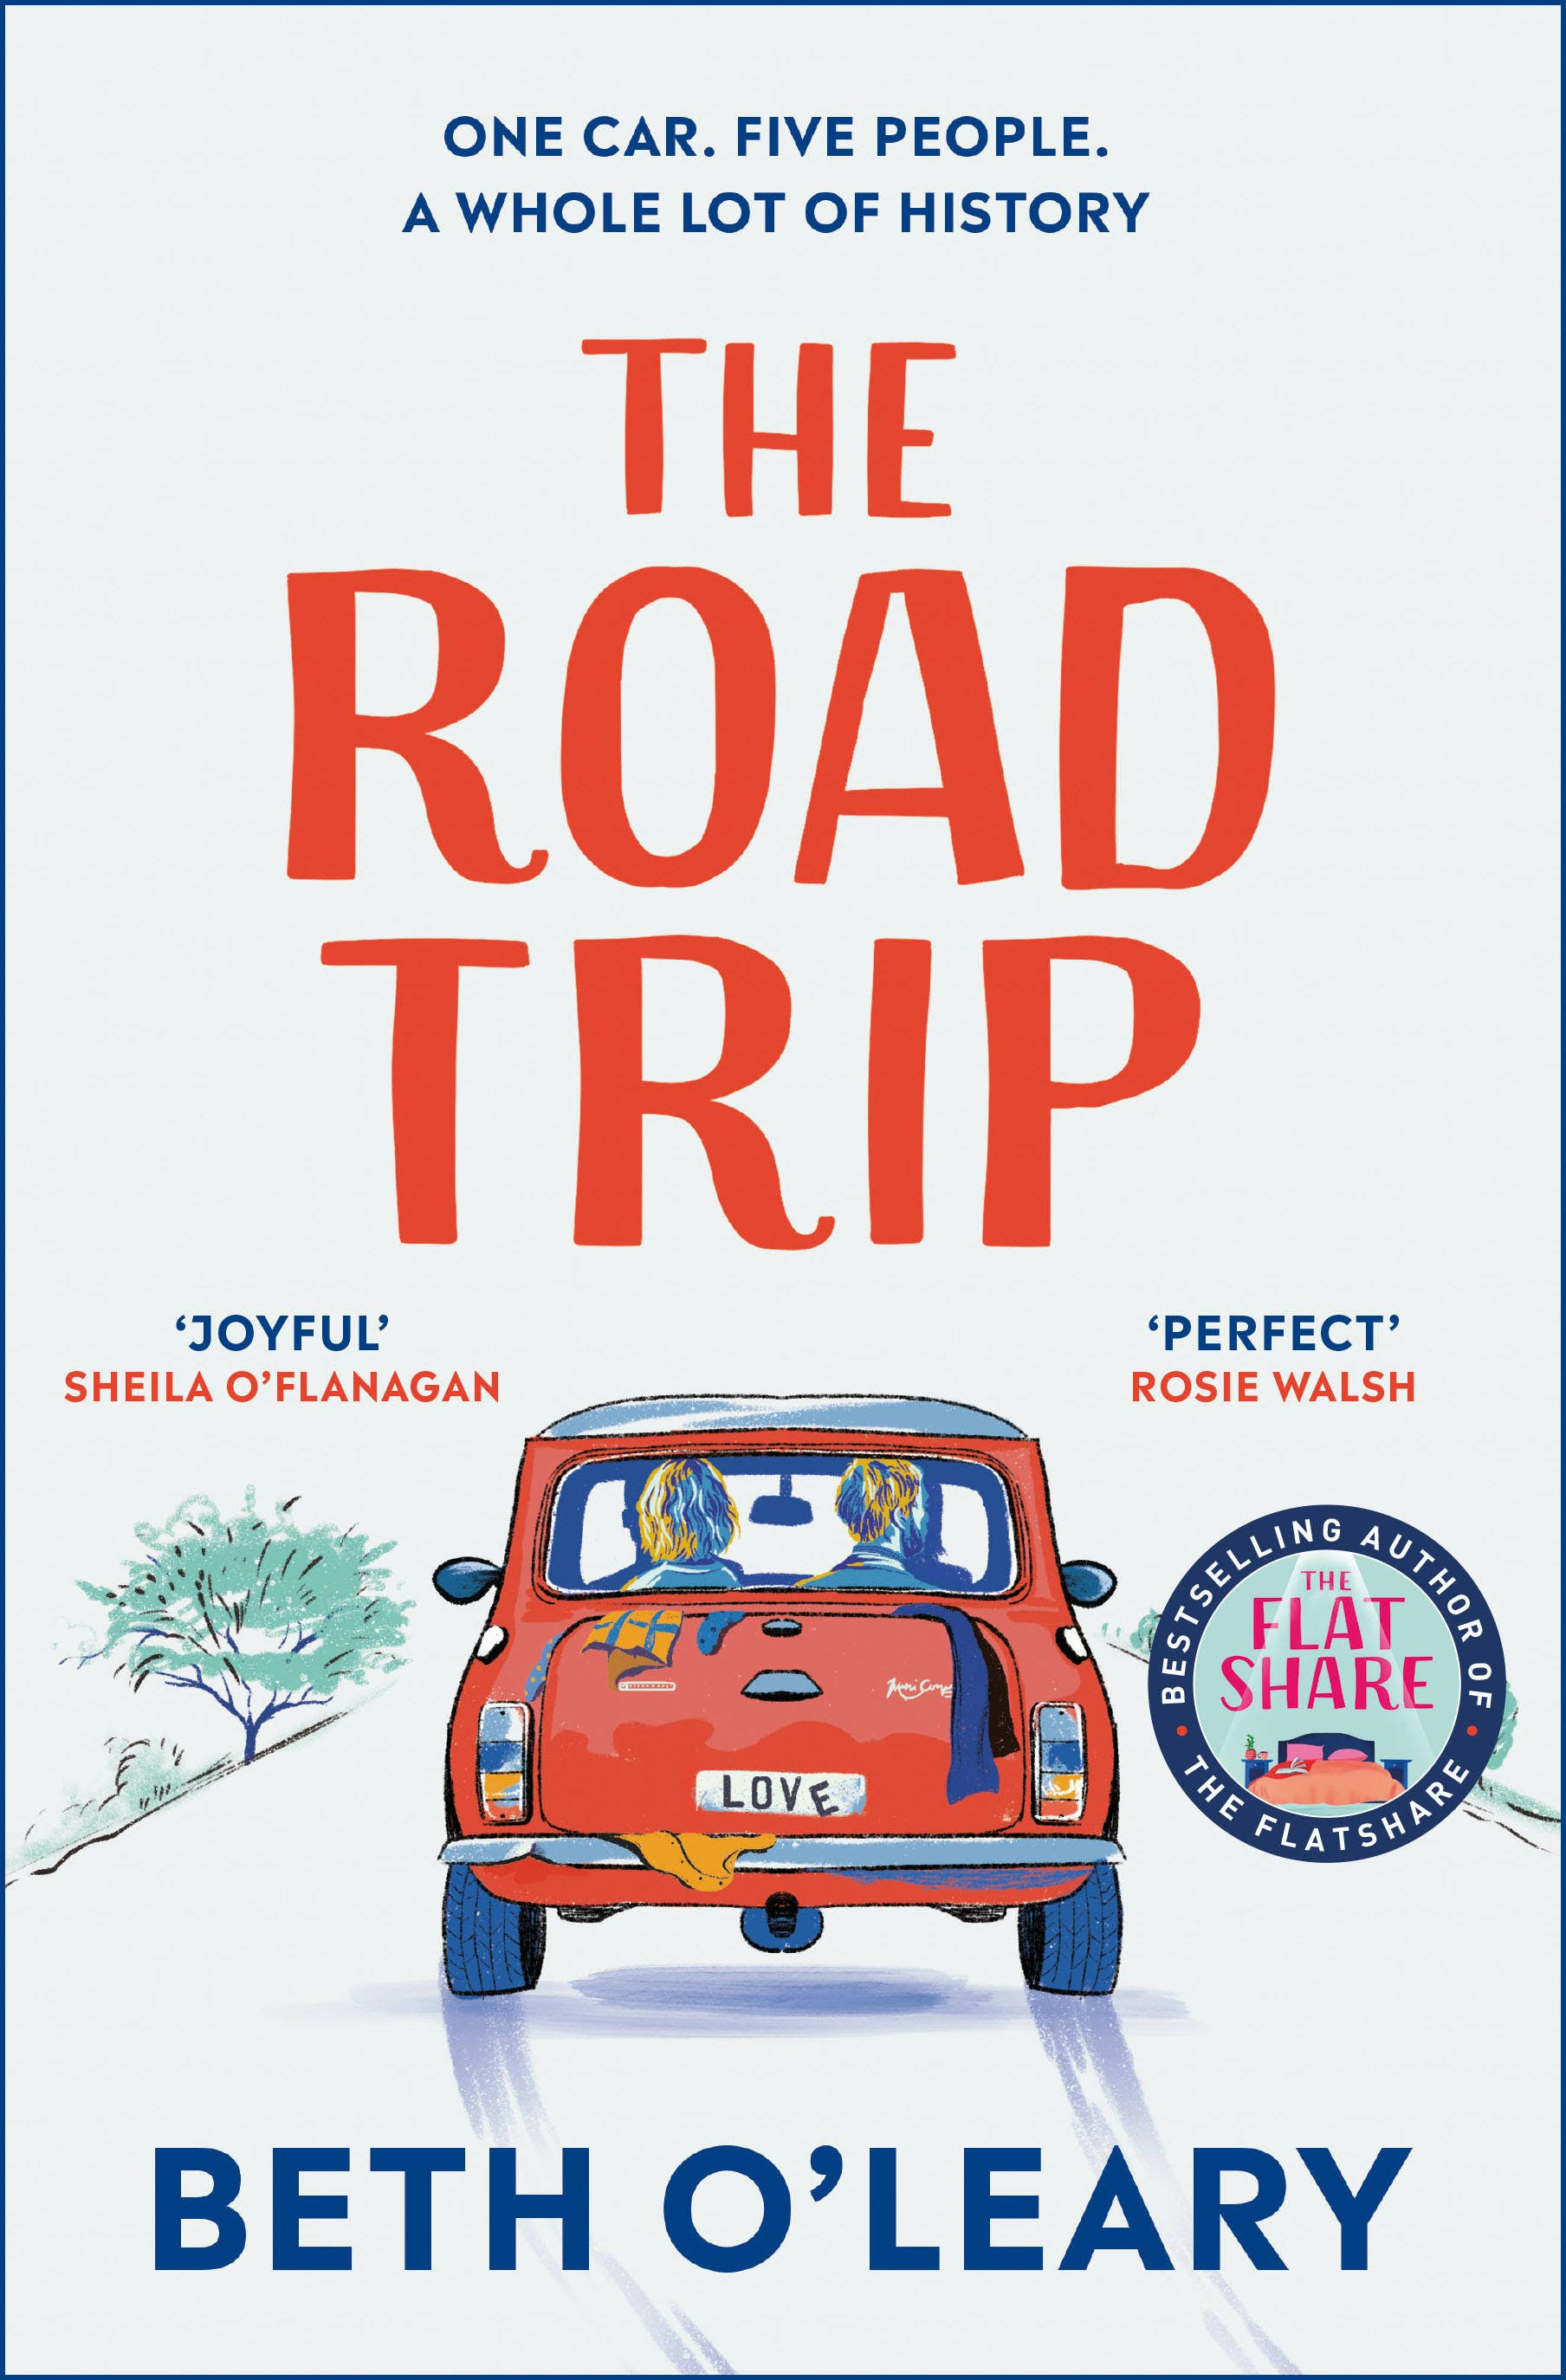 The Road Trip - Beth O'Leary